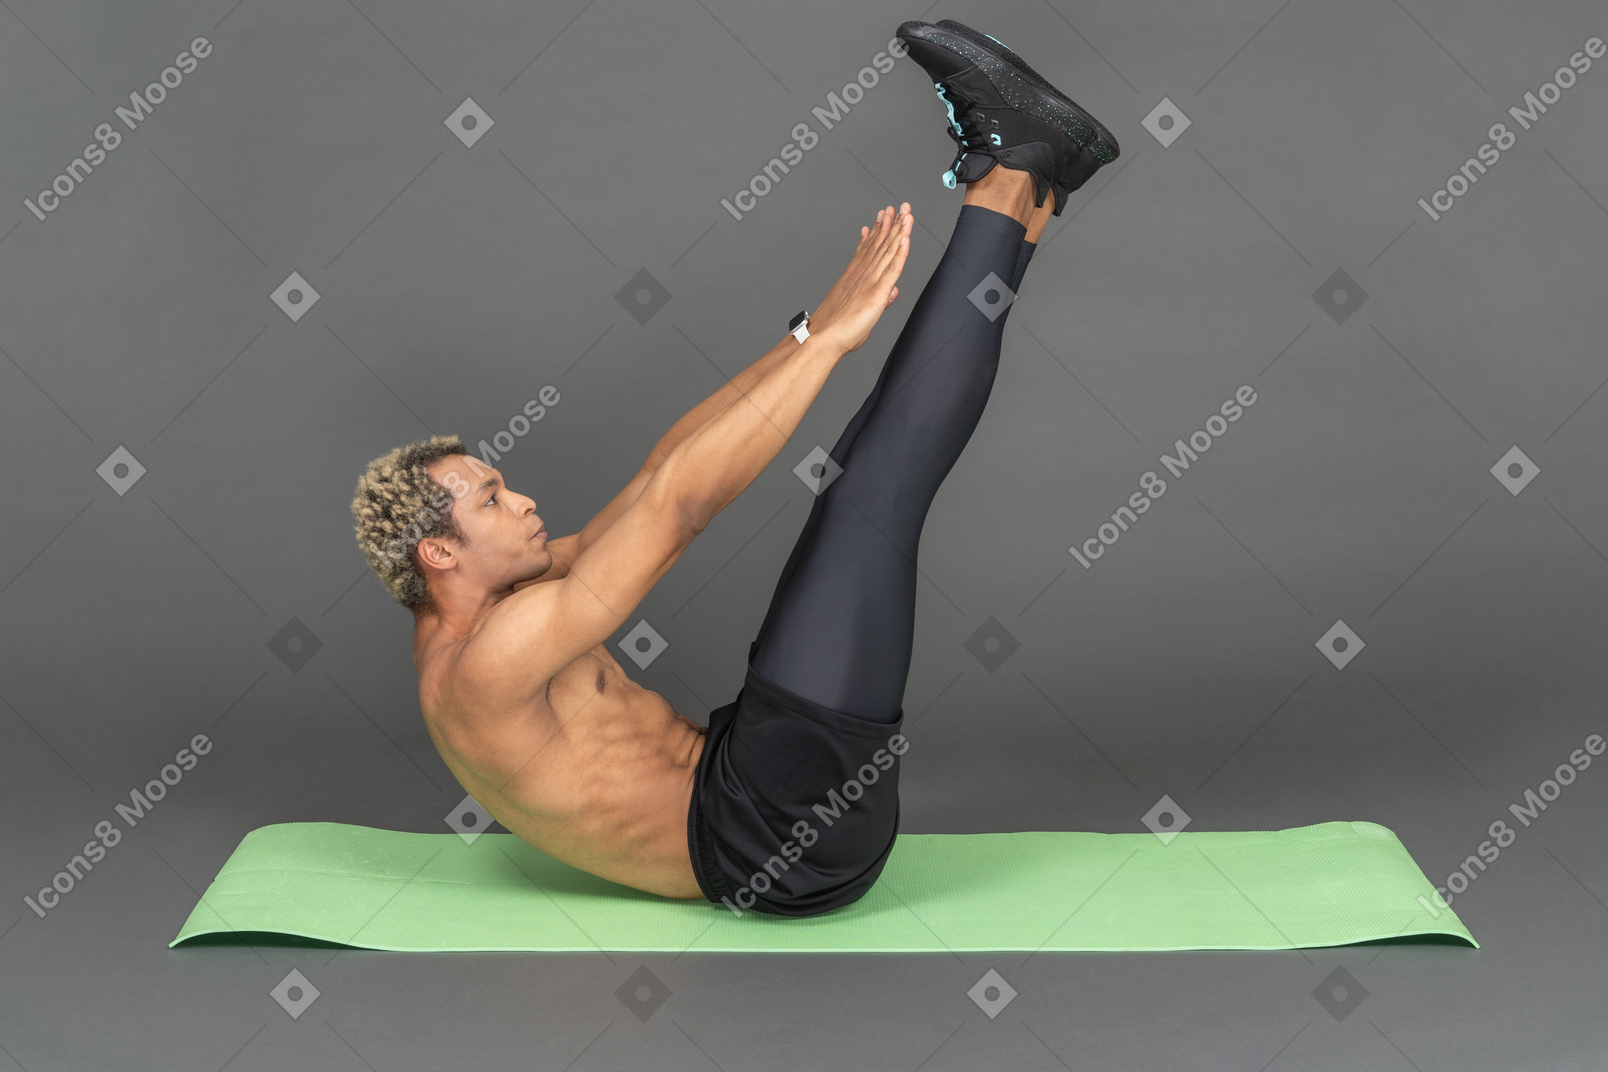 Man doing stretches on a yoga mat